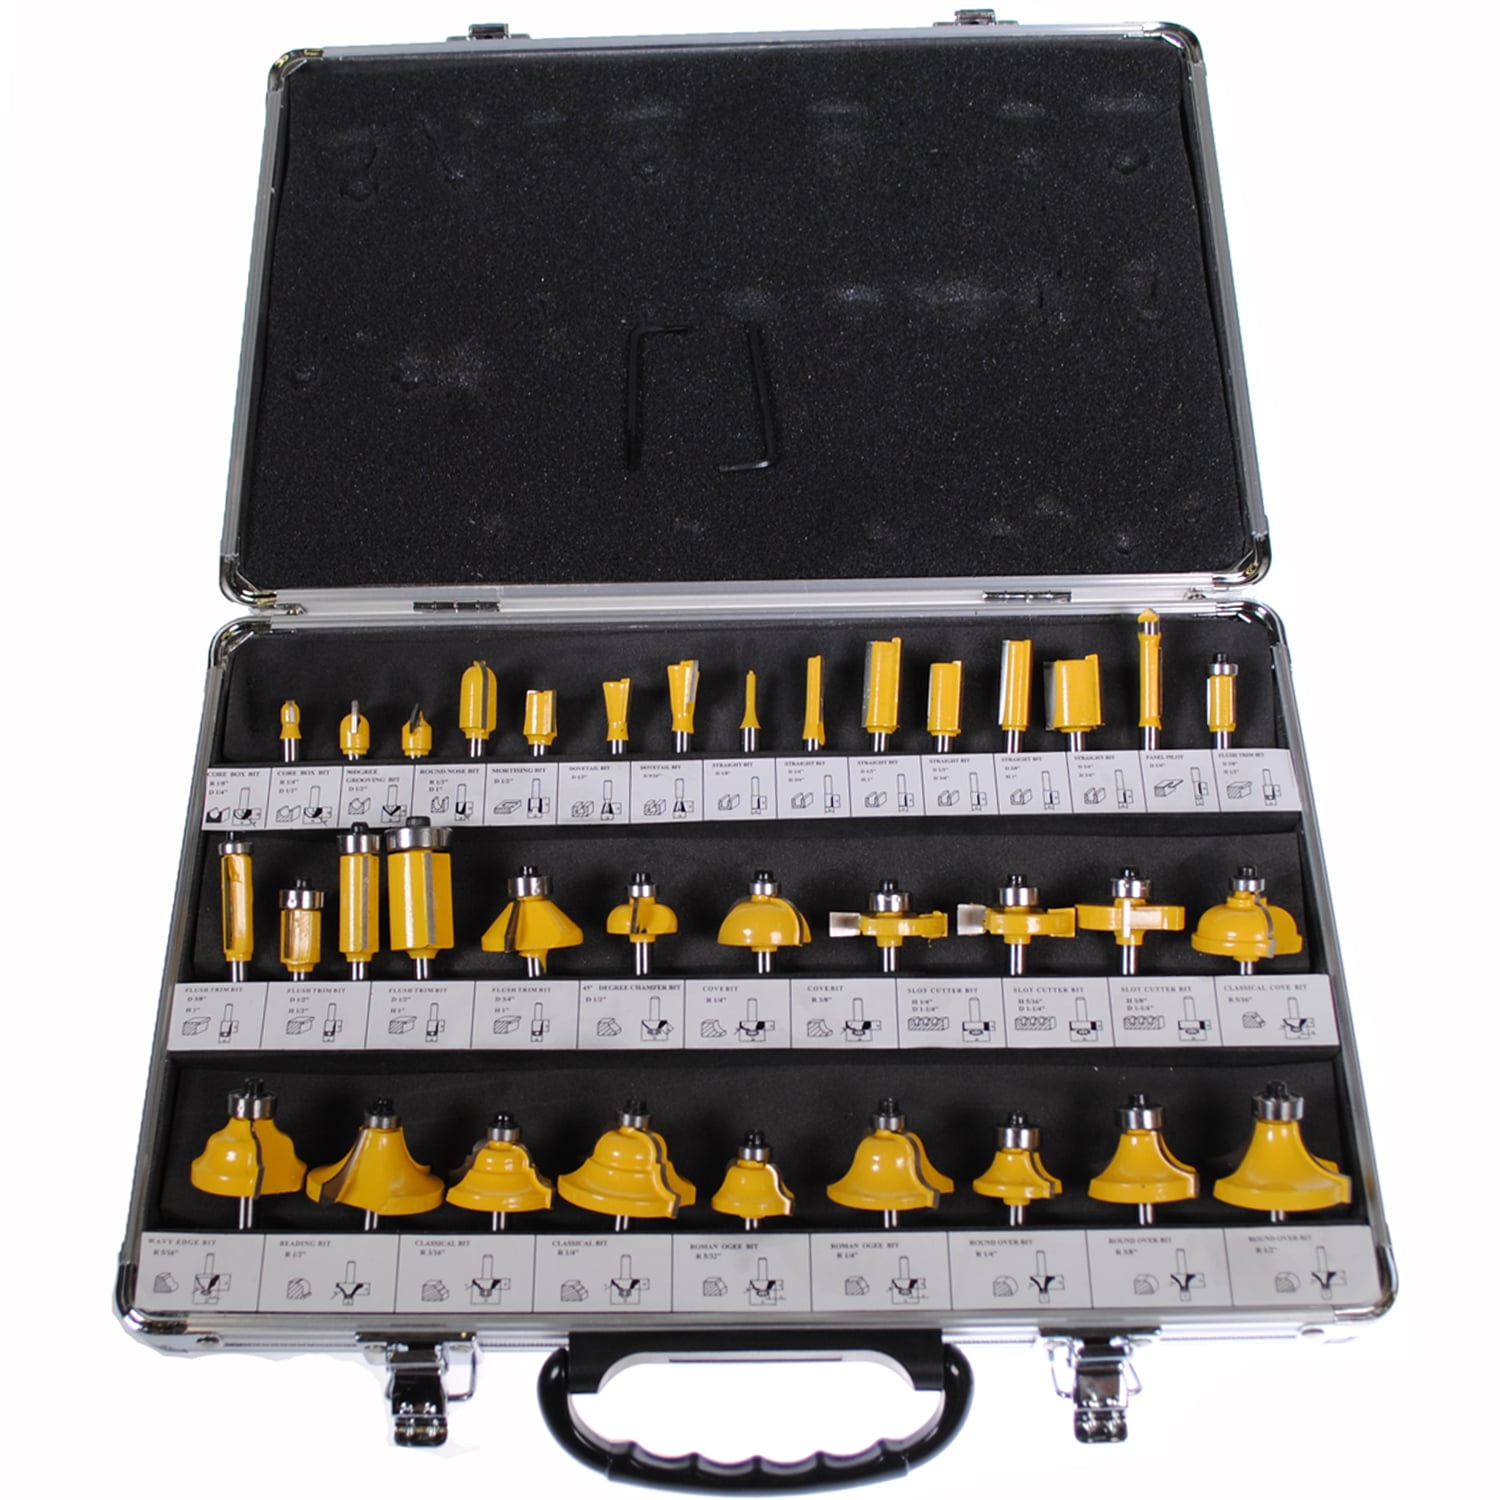 Home-Man 24 piece Carbide Router Bit Set with ¼” Shank and Wood Storage Case Woodworking Tools for Home Improvement and DIY for Beginners to Commercial Users